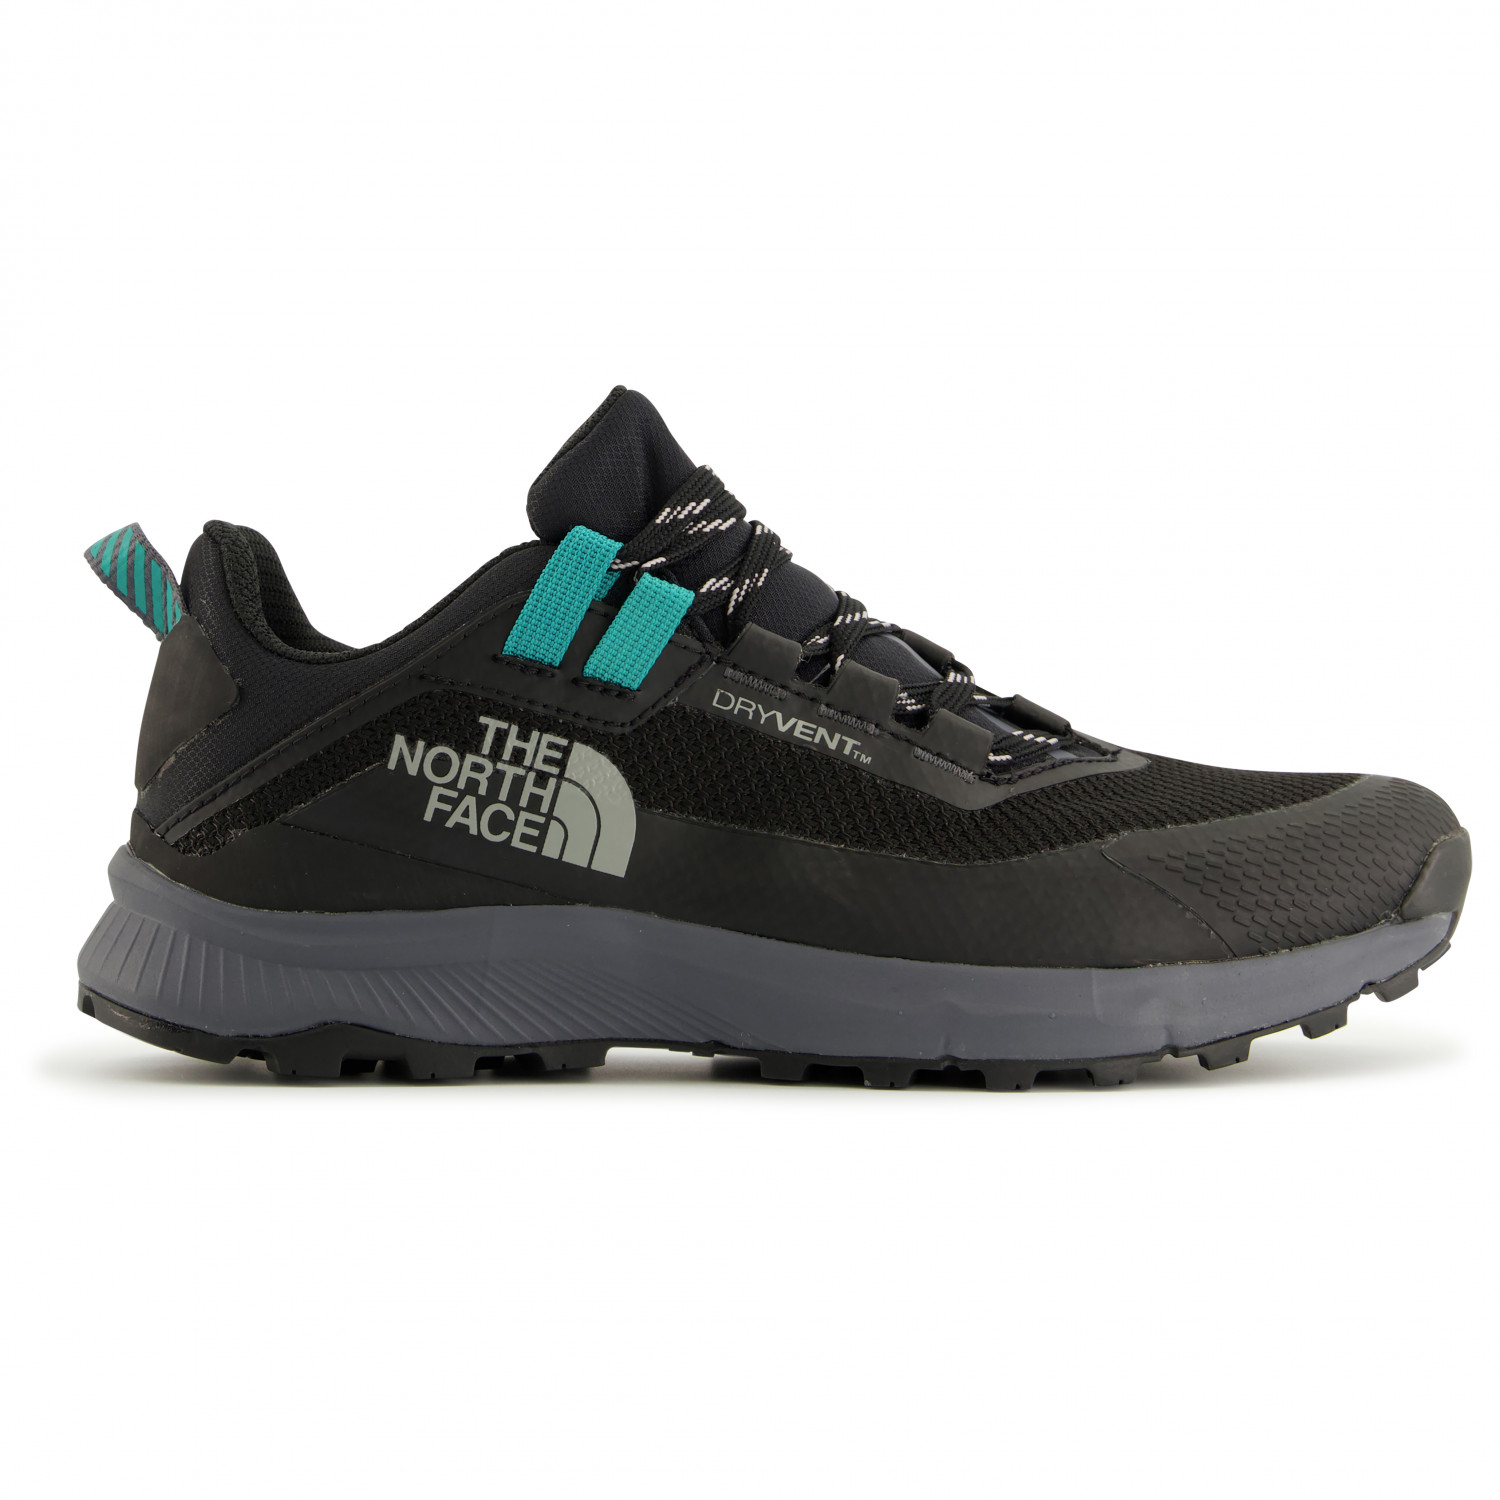 The North Face - Women's Cragstone WP - Multisportschuhe